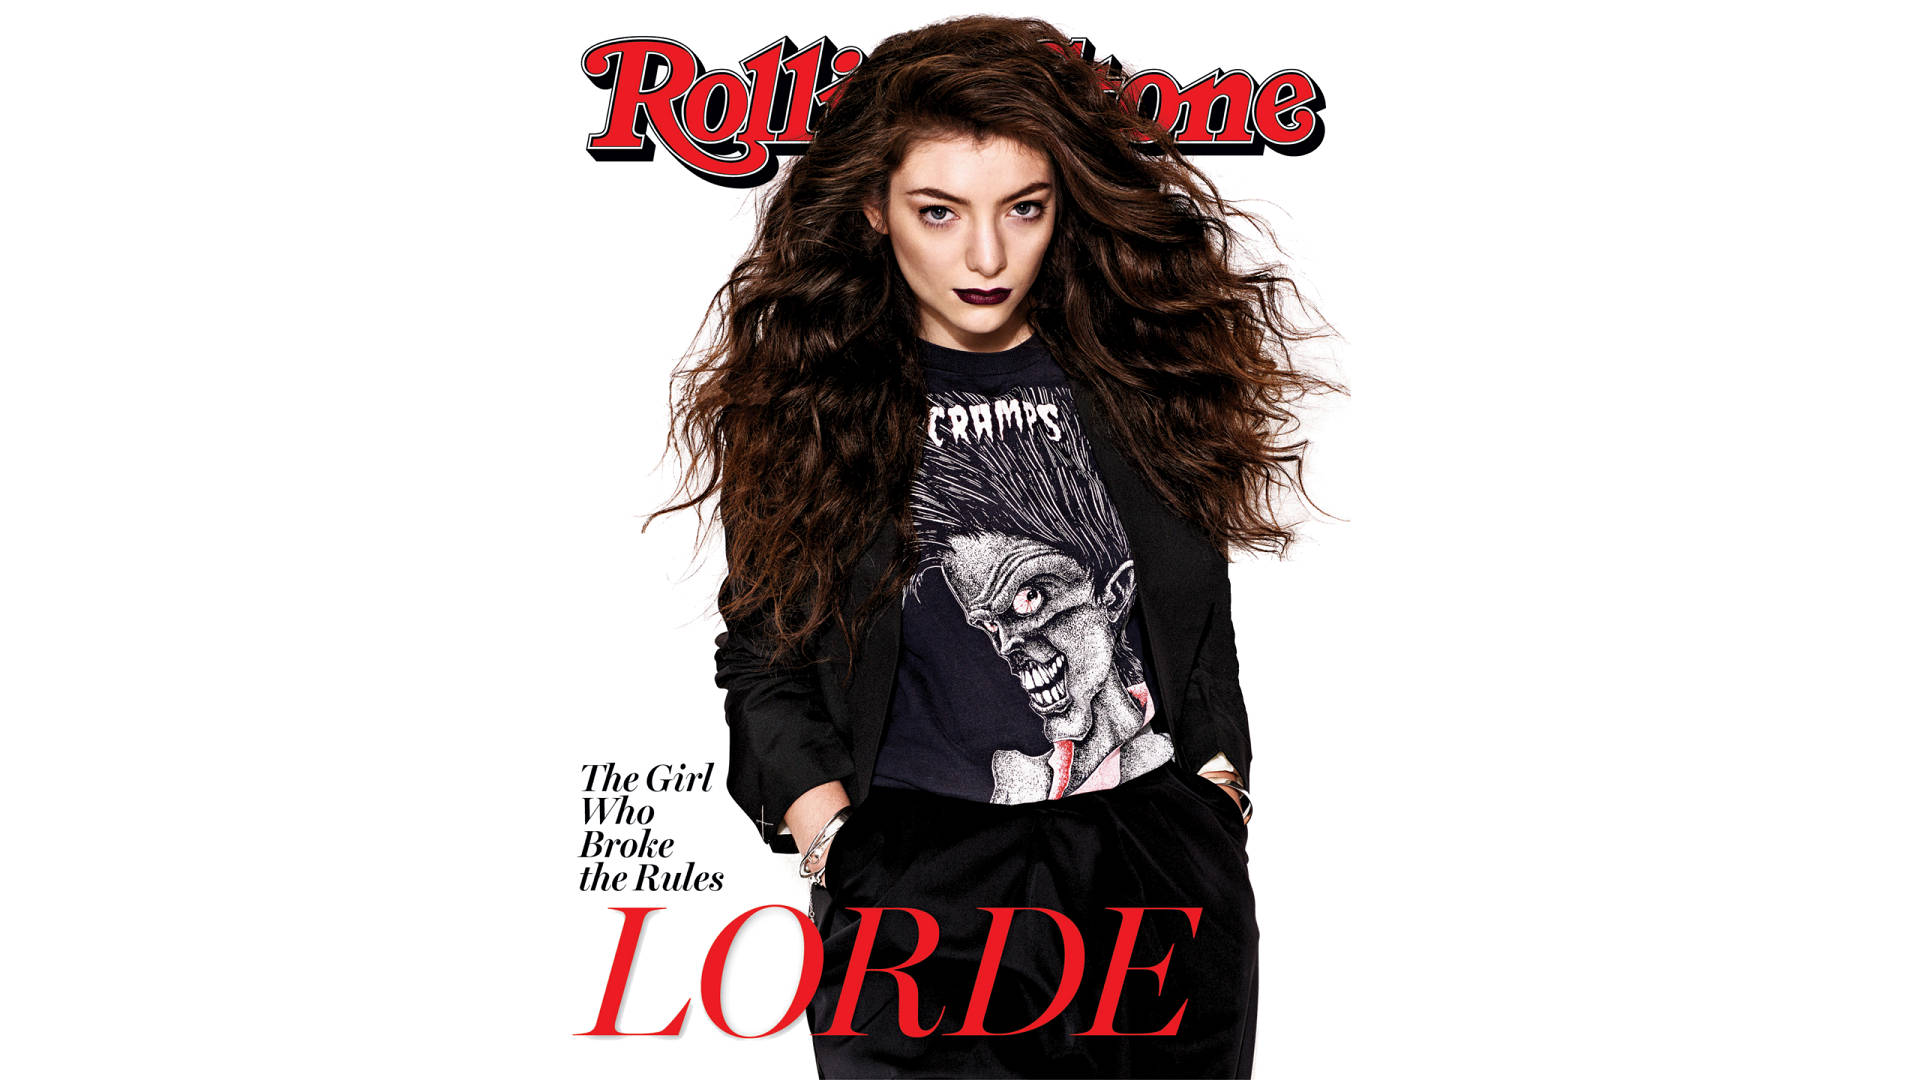 Lorde In Rolling Stone Cover